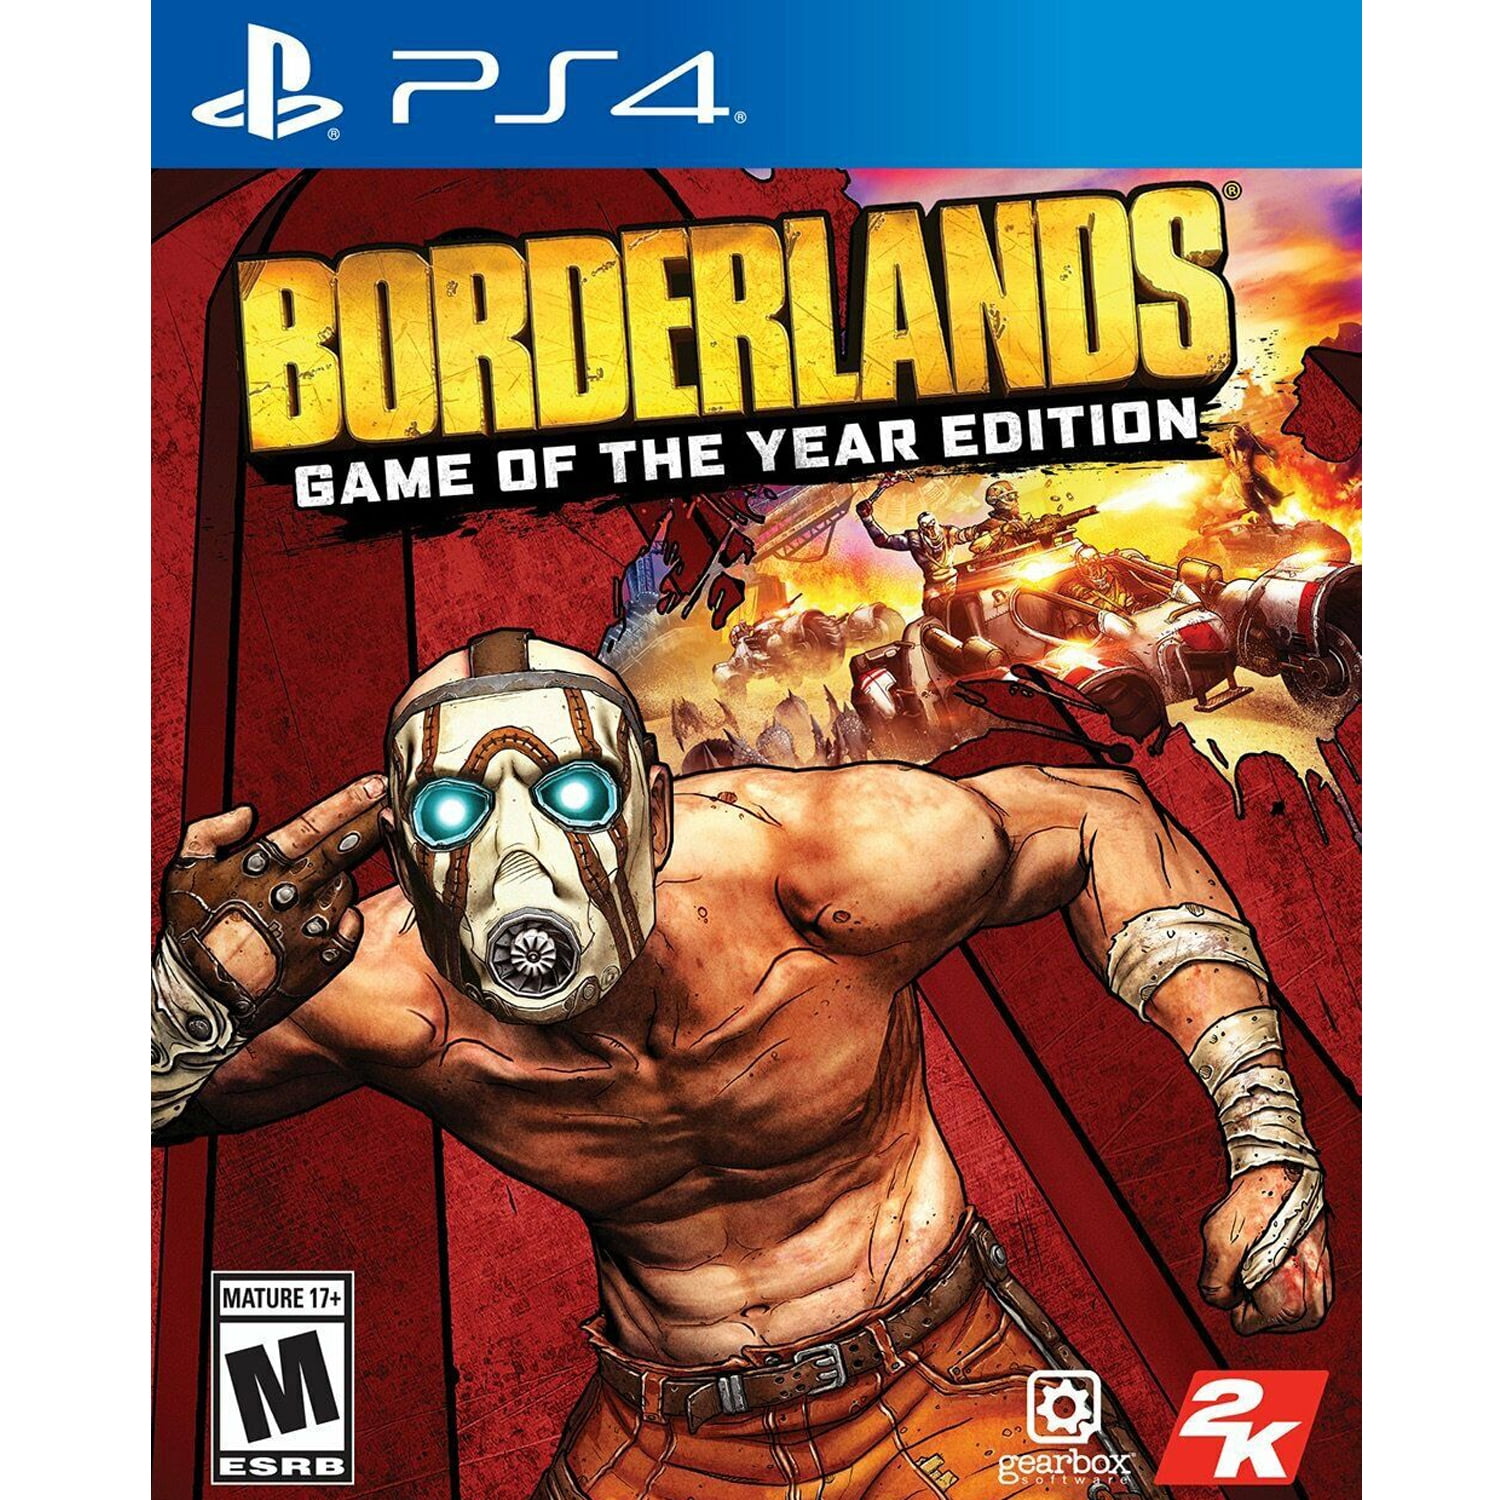 playstation 4 game of the year